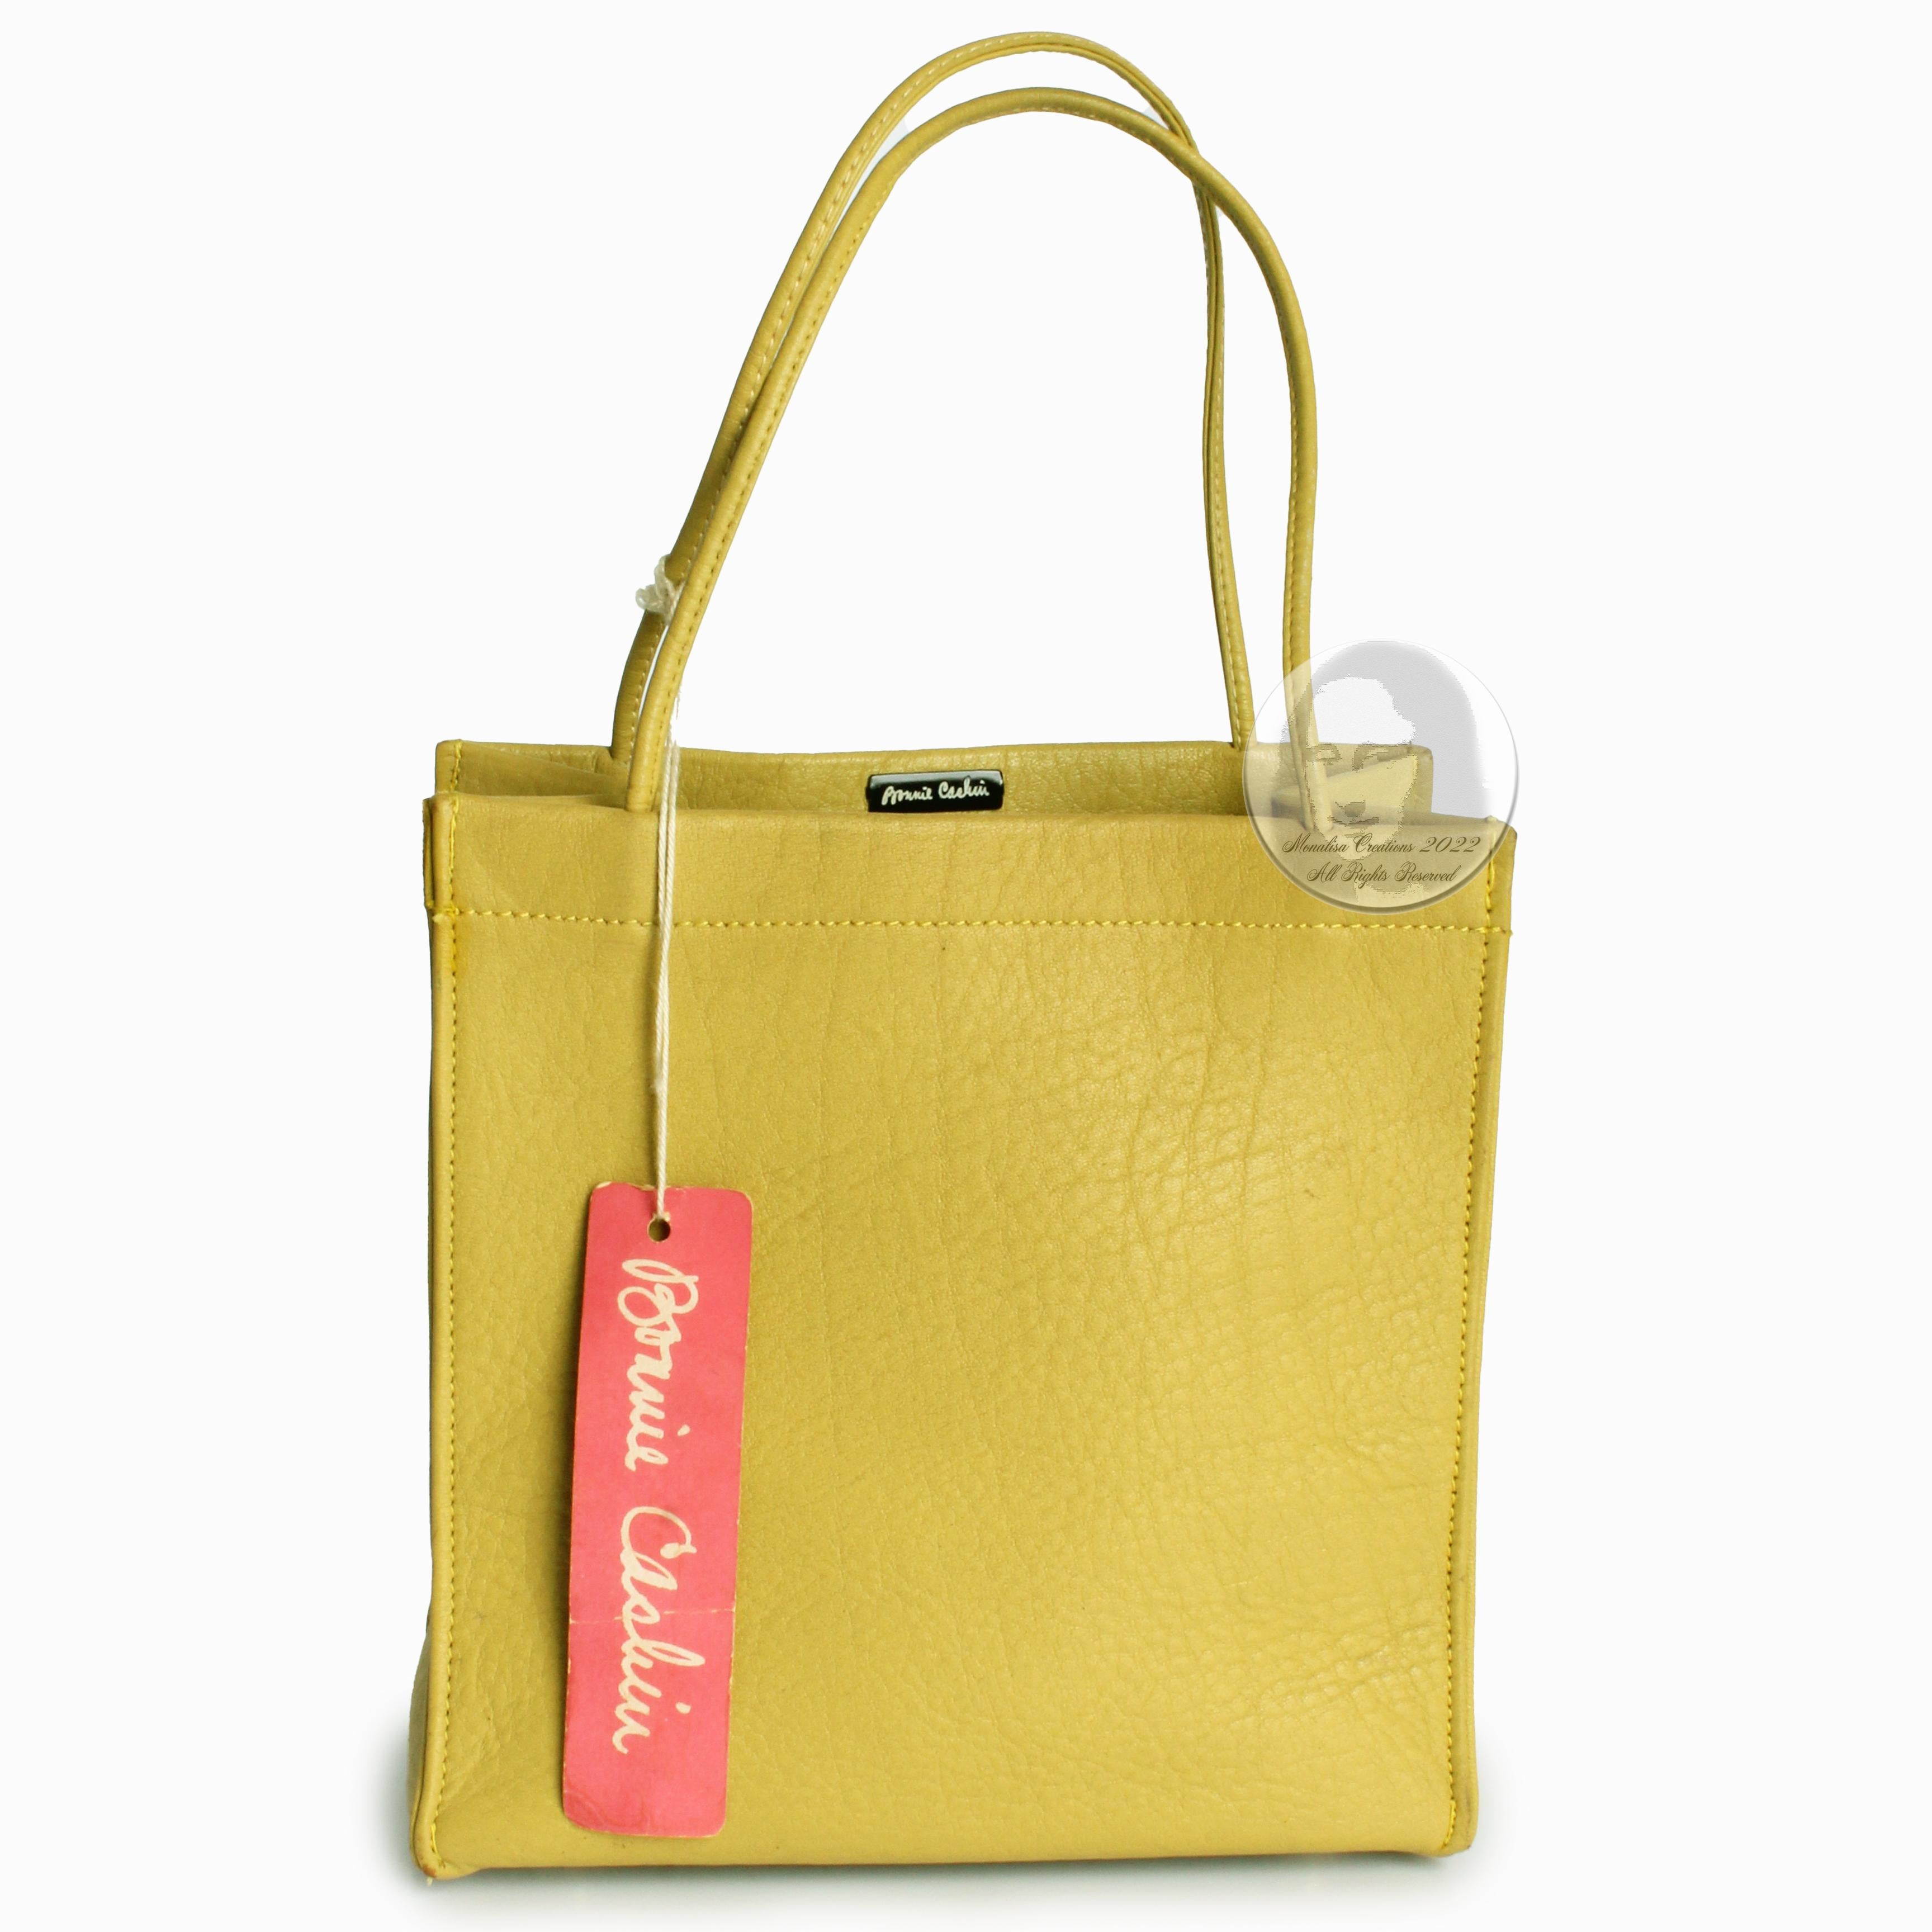 Looking for a ray of sunshine?  This preowned, vintage 60s Bonnie Cashin for Coach mini tote bag should do the trick! Made from 'Mimosa' leather (green with yellow undertones), it has four metal feet at the bottom and is lined in Cashin's signature